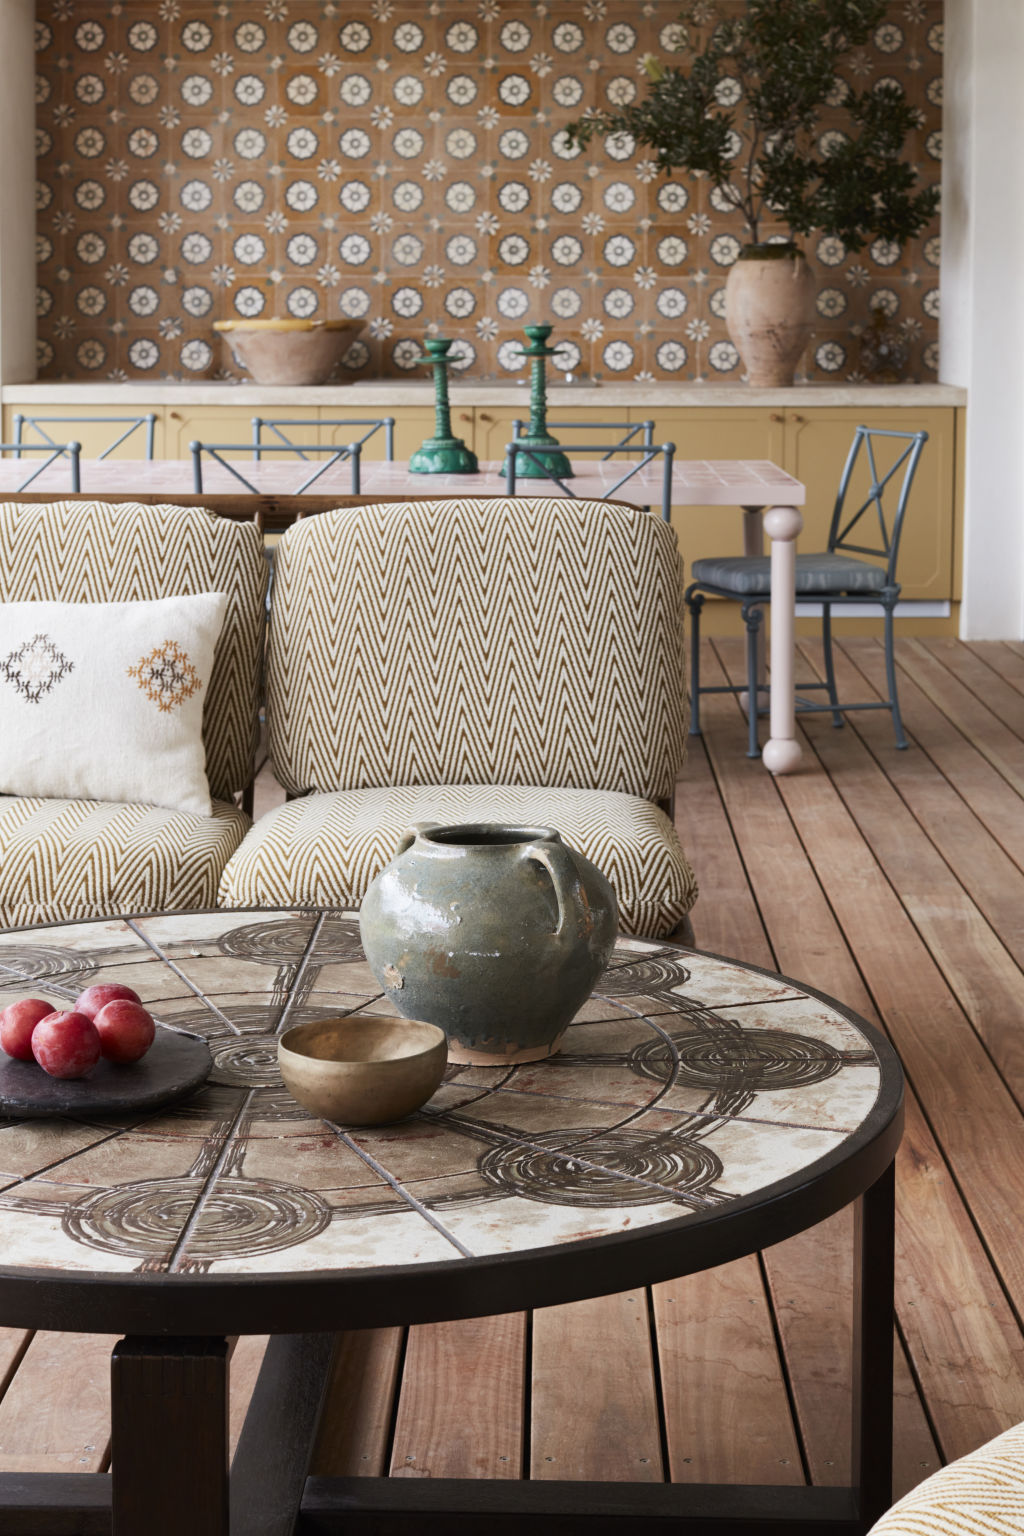 Prints are the starting point for many designers when creating an interior theme. Photo: Prue Ruscoe